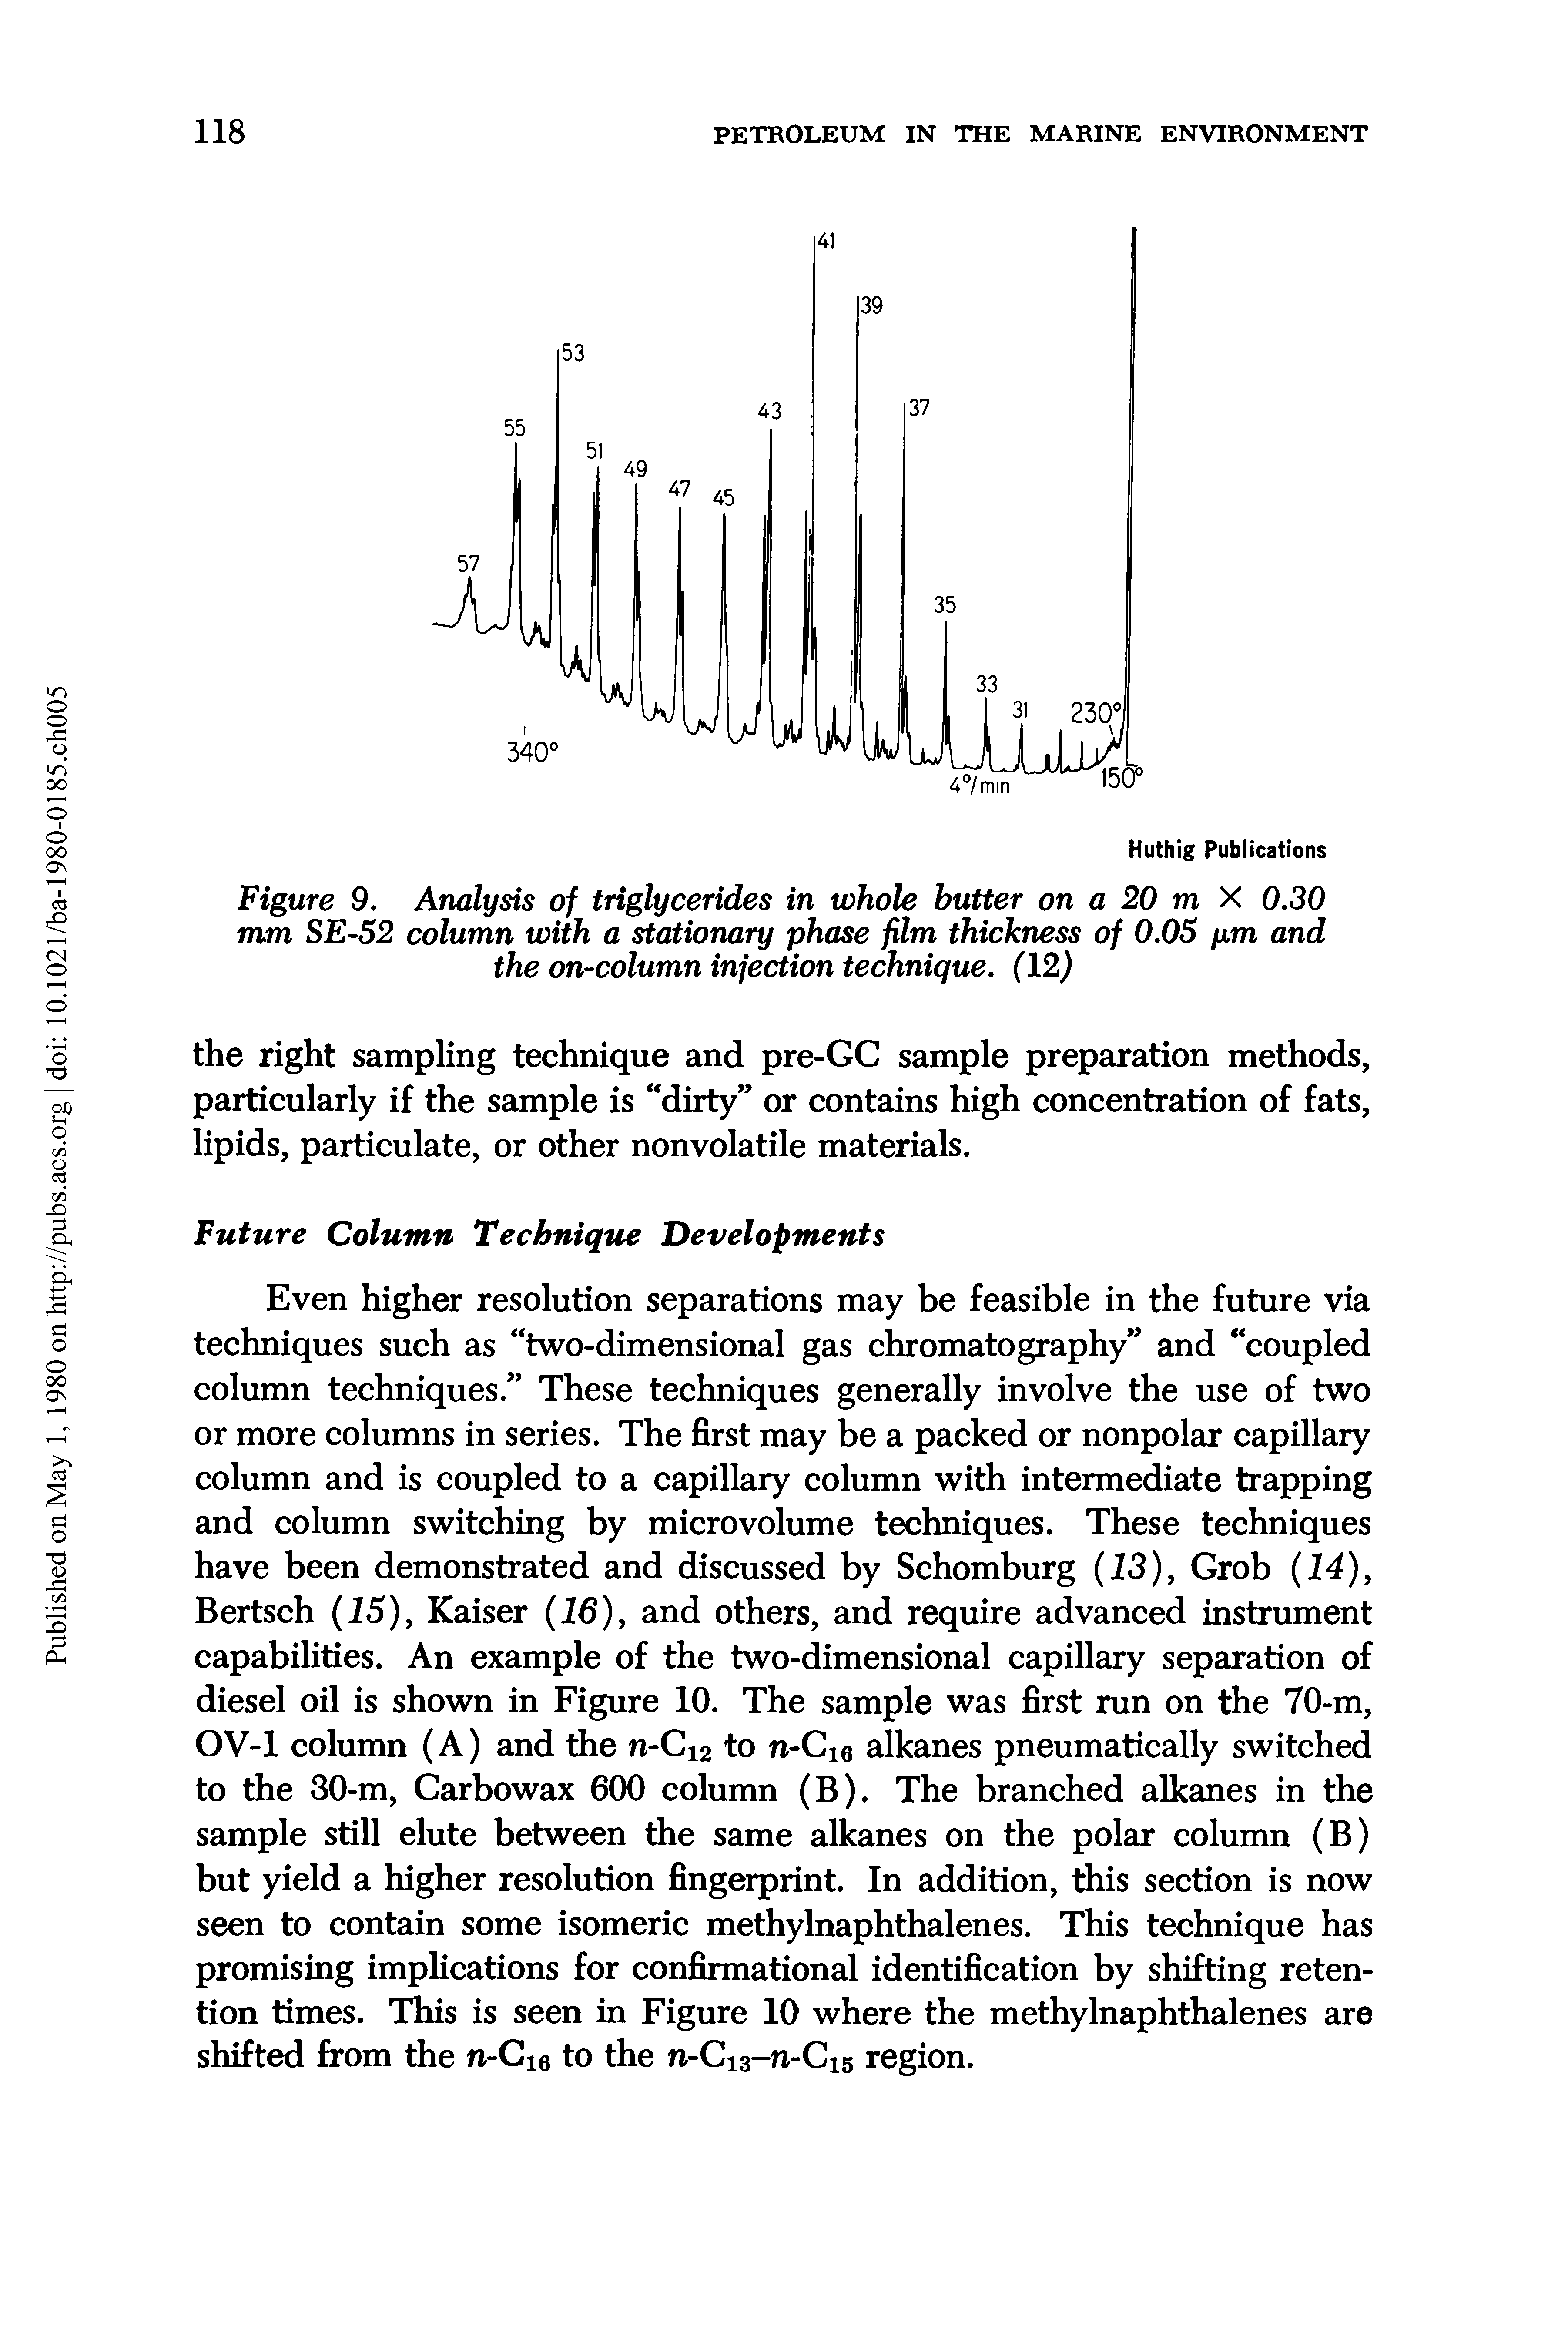 Figure 9. Analysis of triglycerides in whole butter on a 20 m X 0.30 mm SE-52 column with a stationary phase film thickness of 0.05 pm and the on-column injection technique. (12)...